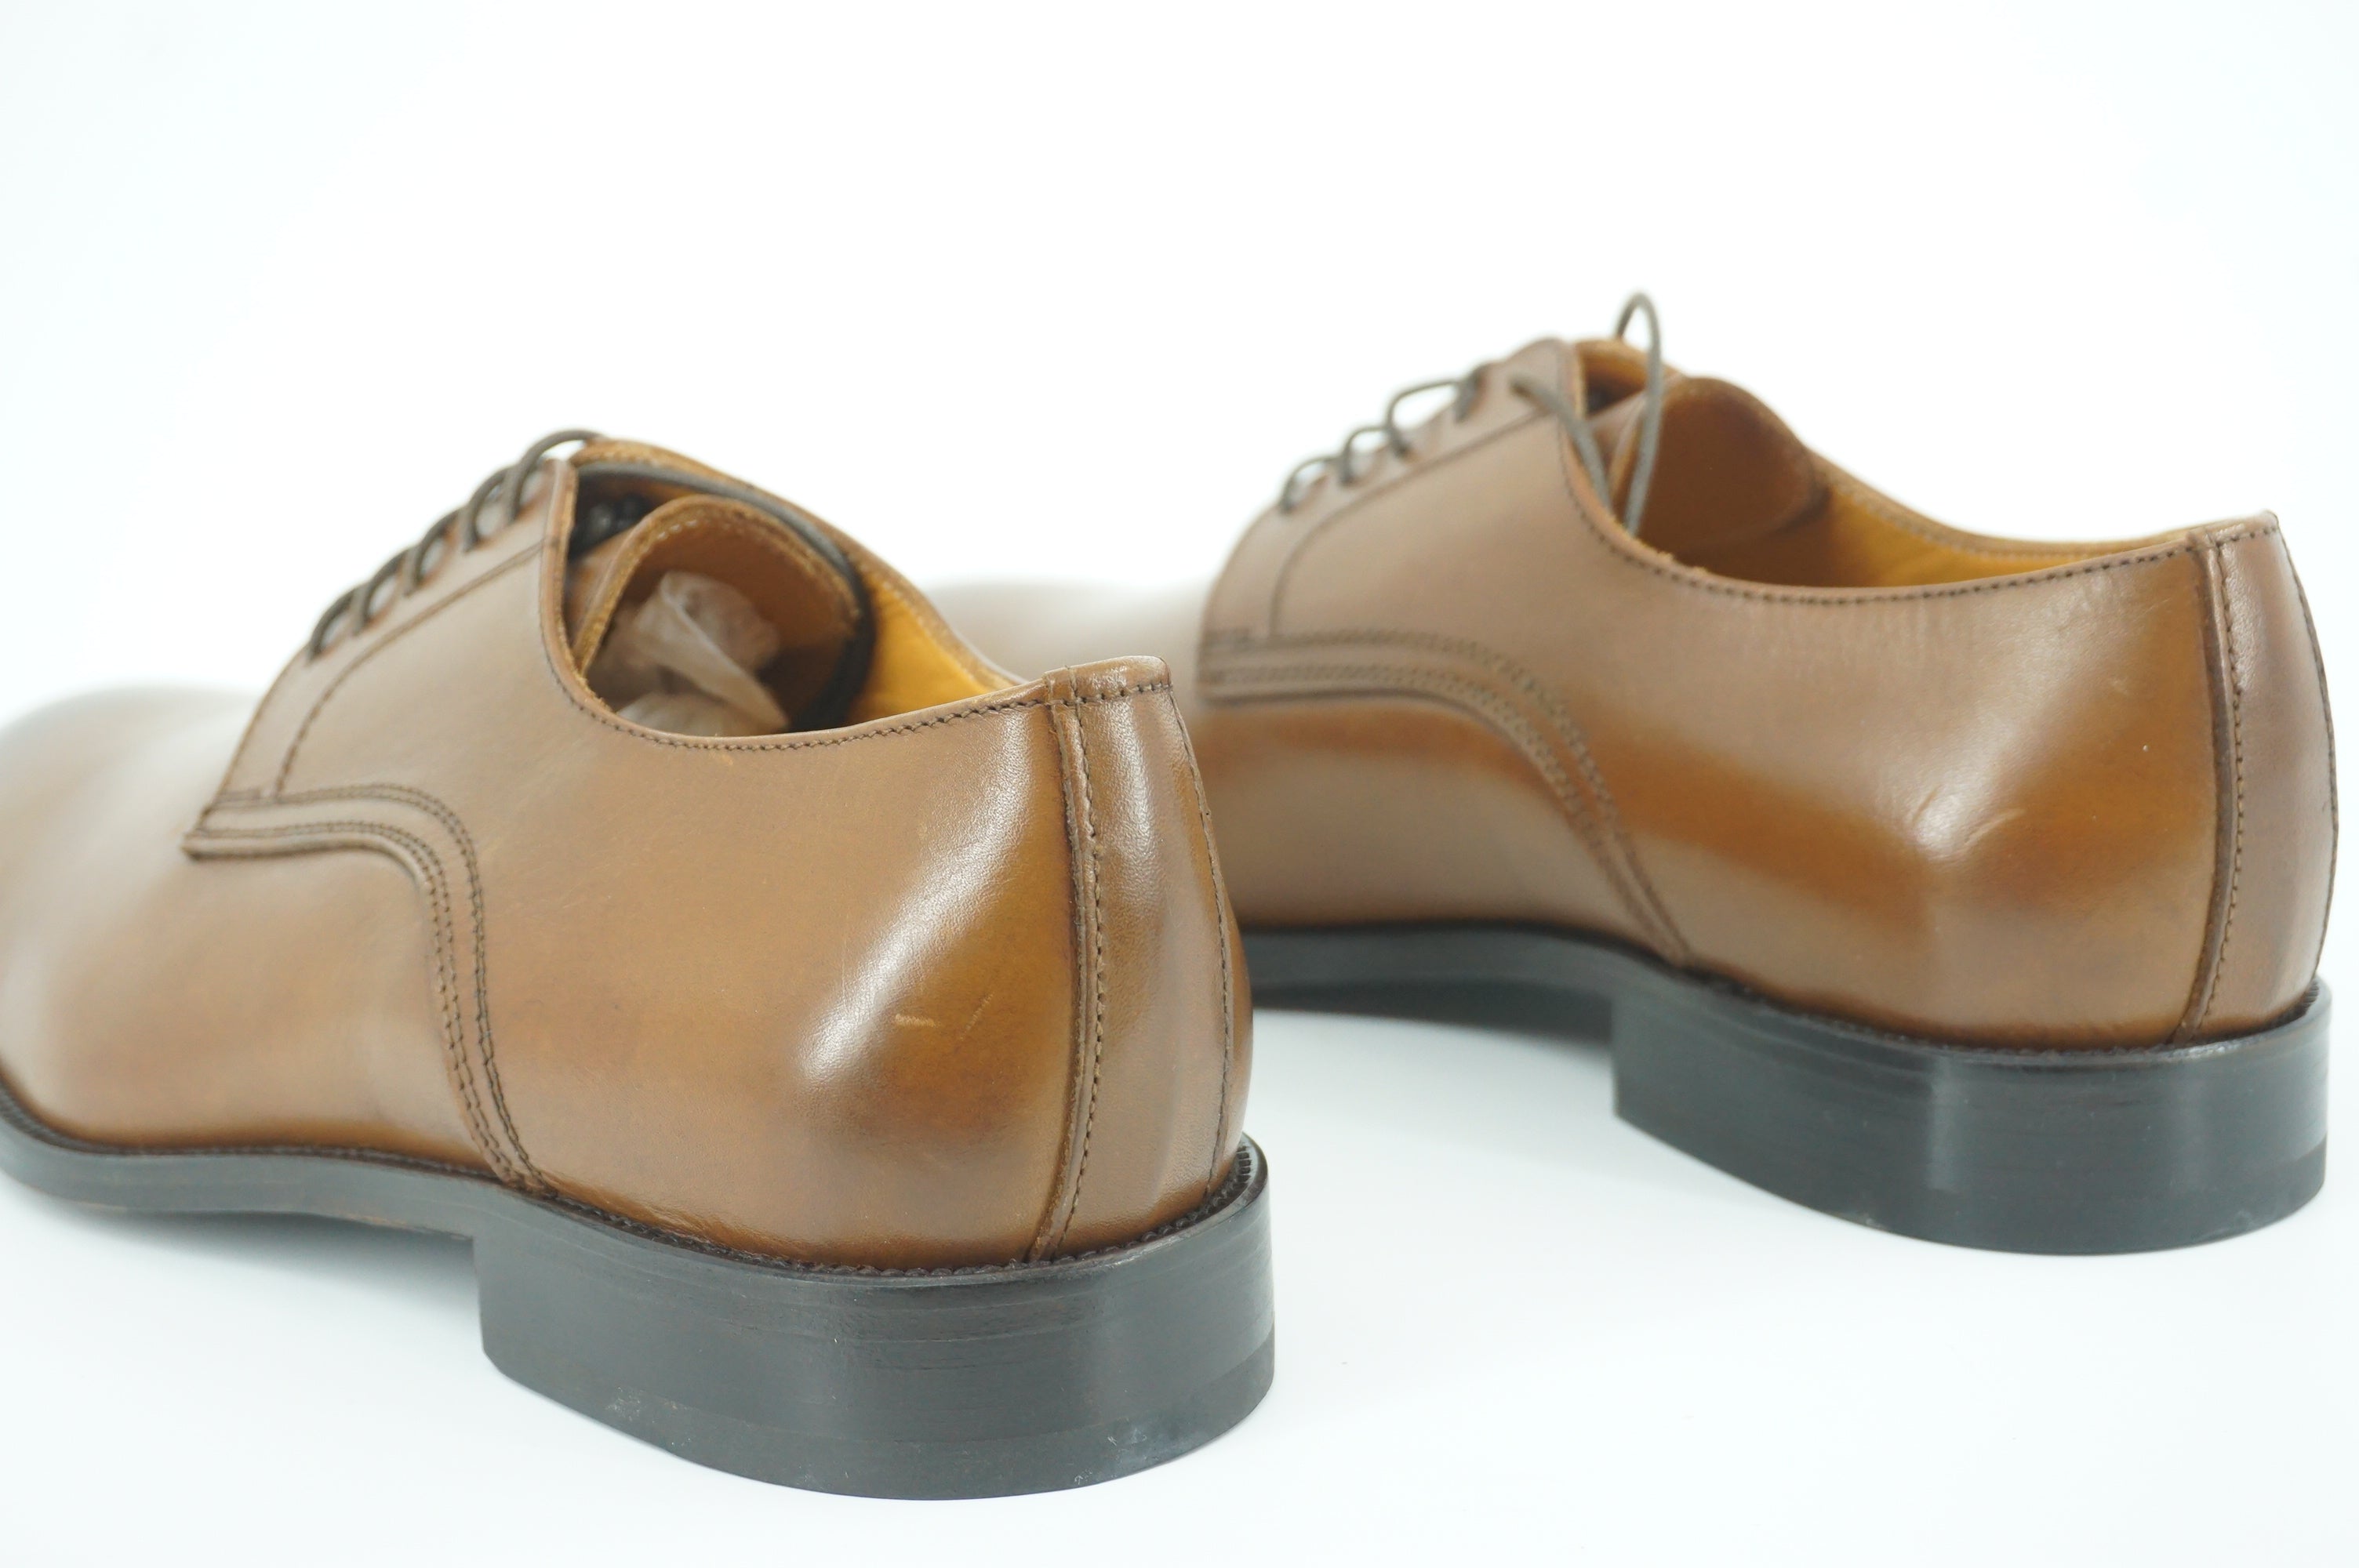 To Boot New York Bellaire Derby Oxford Dress Shoe Size 8 Burnished Brown $395